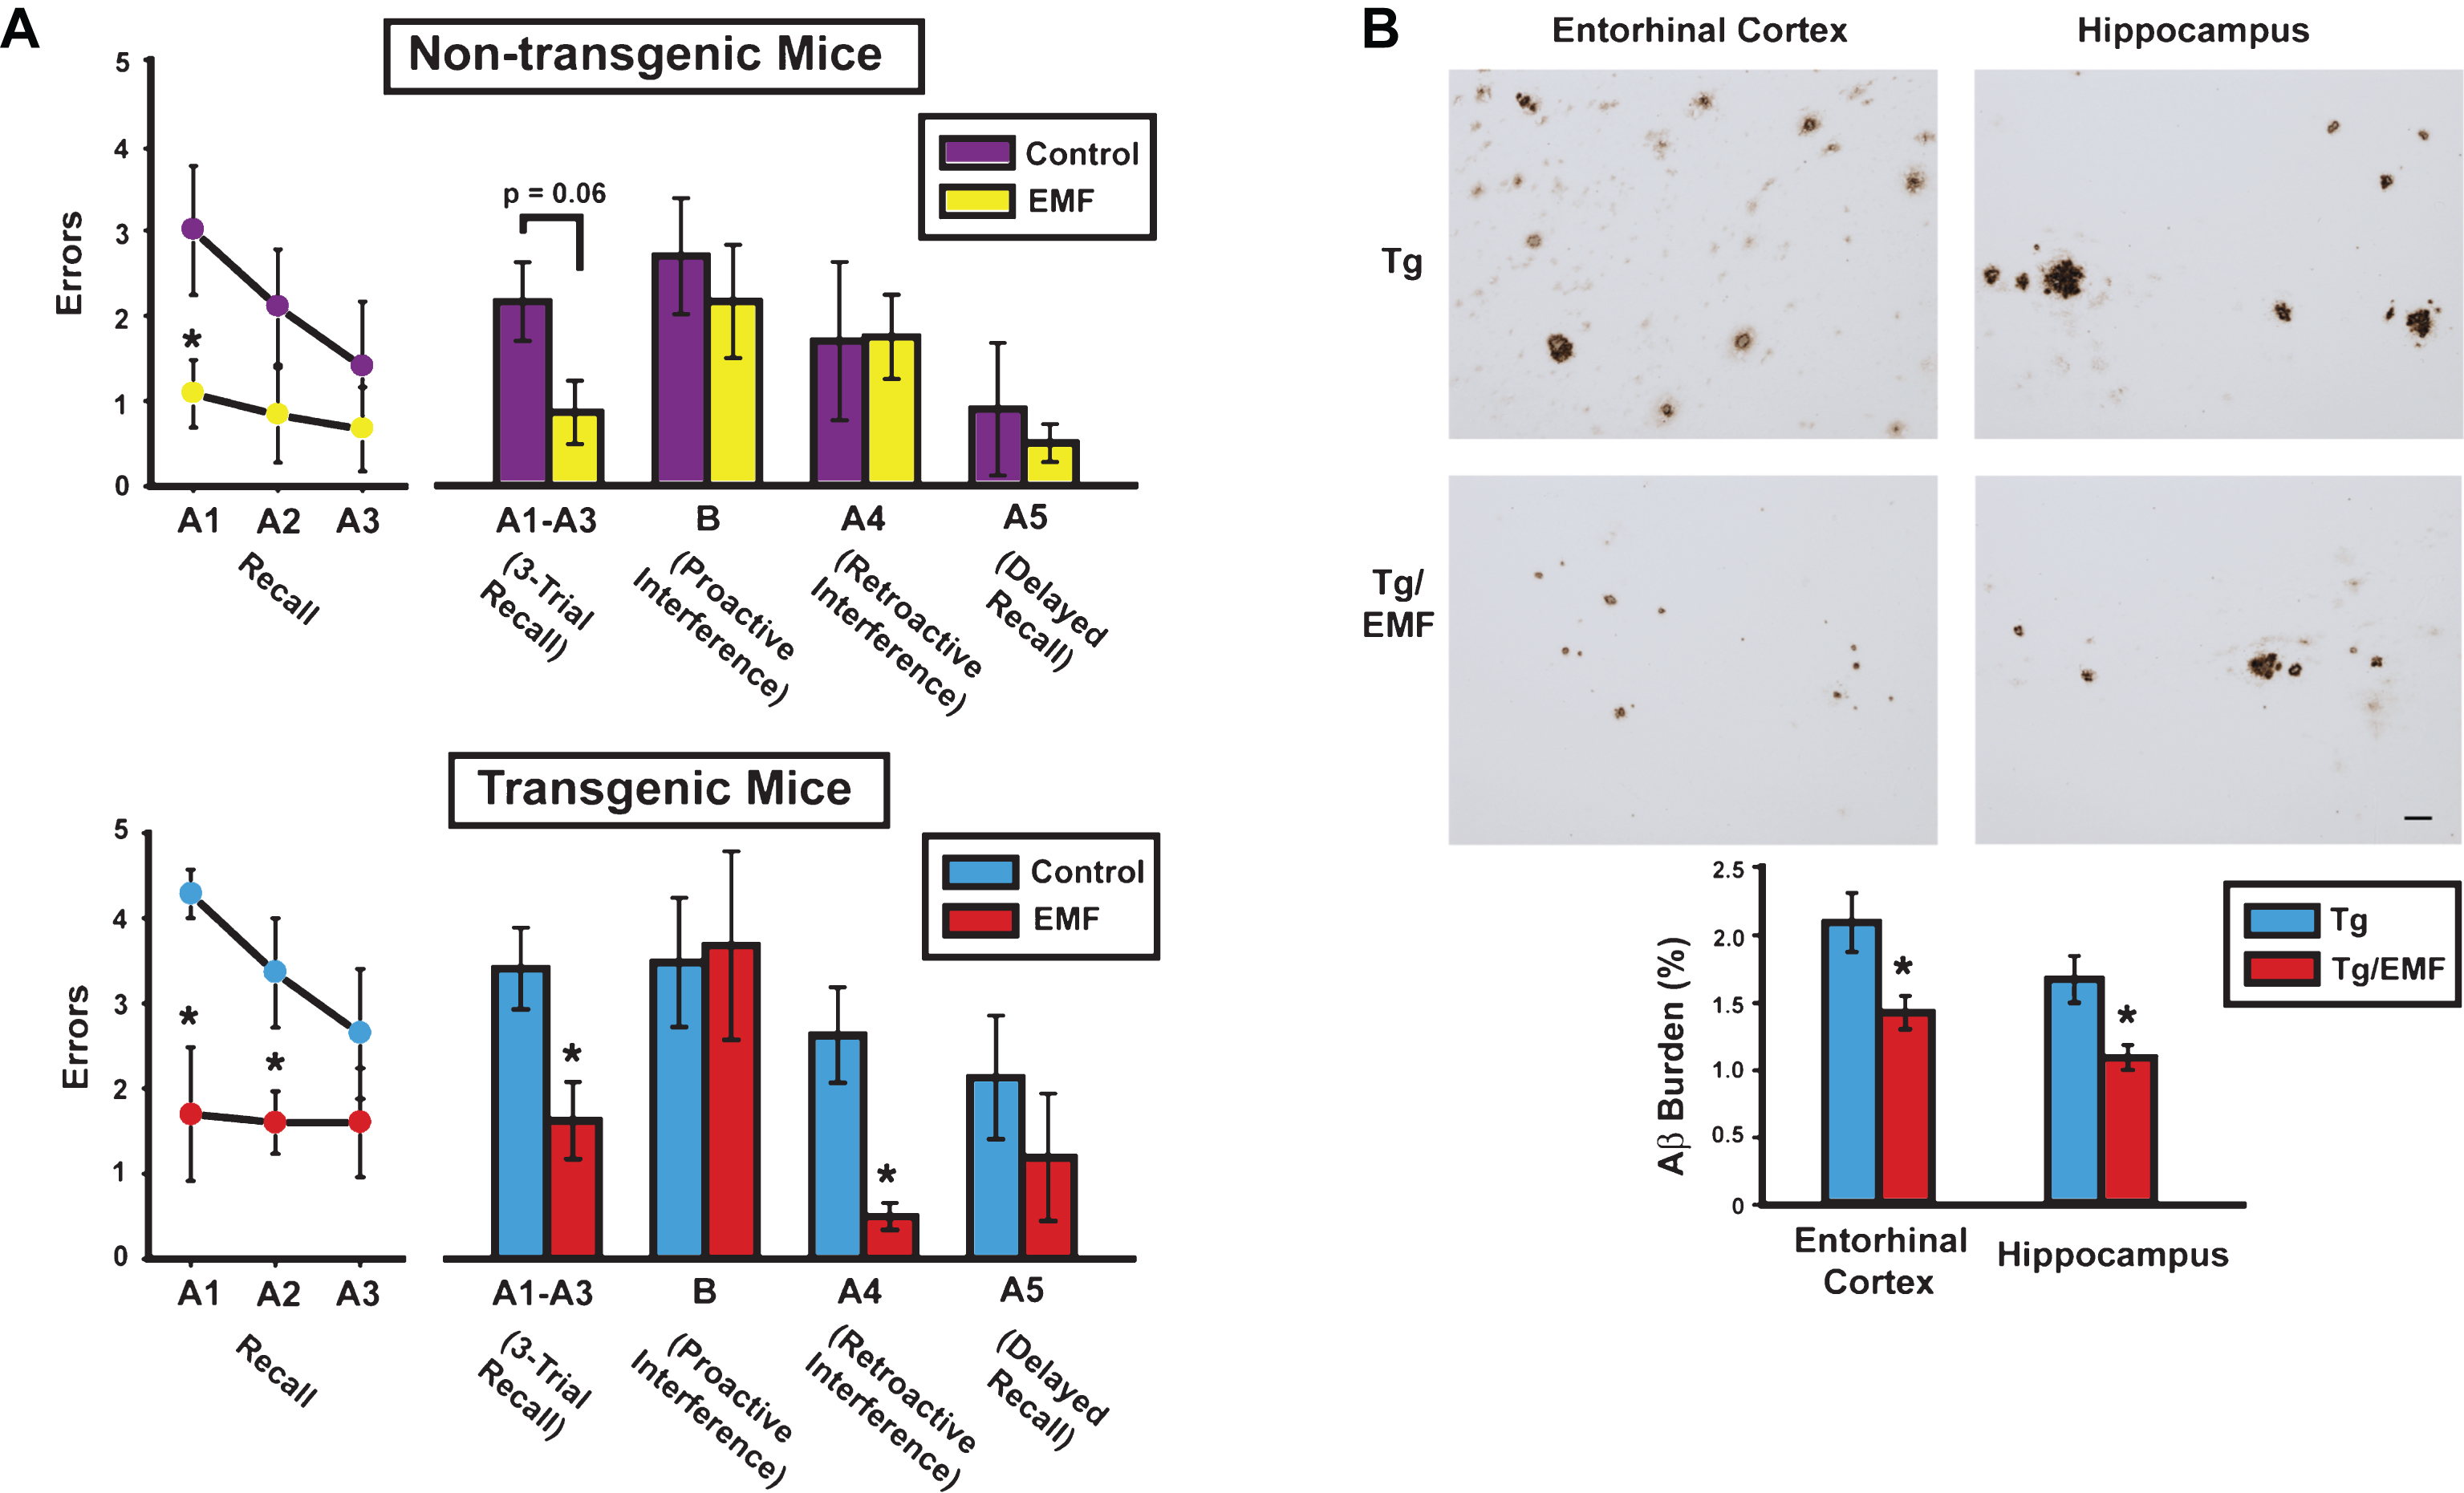 At 8 months into EMF treatment, cognitively-impaired AD mice (Tg) mice exhibited cognitive benefits and reduced brain Aβ deposition. A) Cognitive interference testing revealed Tg/EMF mice as vastly superior to Tg controls in 3-trial recall and retroactive interference performance. Even non-transgenic (NT) mice receiving EMF exposure showed better recall performance than NT controls, particularly early in recall testing. The final 2-day block of testing is shown from four days of testing. Upper graph: *p < 0.025 versus control; Lower graph: *p < 0.05 or higher level of significance versus control. B) Long-term EMF treatment significantly reduced total Aβ deposition in entorhinal cortex and hippocampus of Tg mice. Photomicrographic examples of typical Aβ immunostained-plaques from Tg and Tg/EMF mice are provided. *p < 0.02 versus Tg control group. Scale bar = 50 μm.